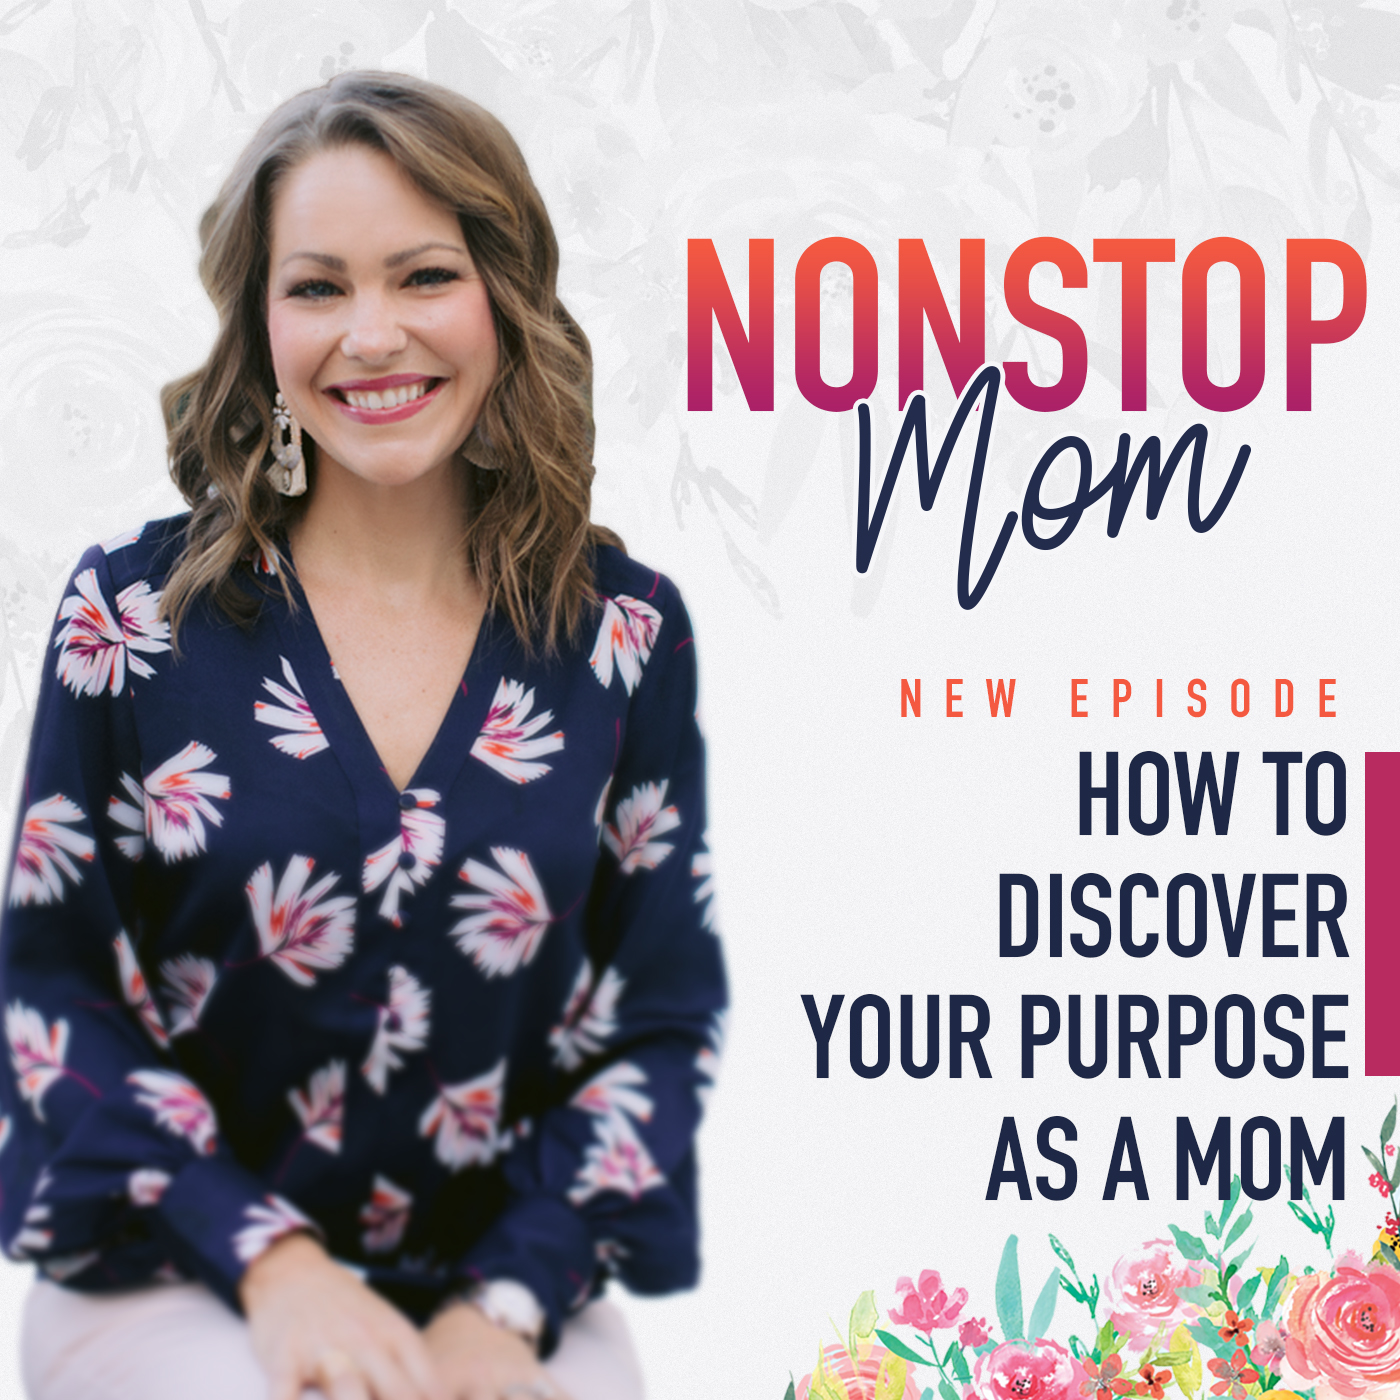 How to Discover Your Purpose As A Mom with Carolyn Shuttlesworth on the Nonstop Mom Podcast